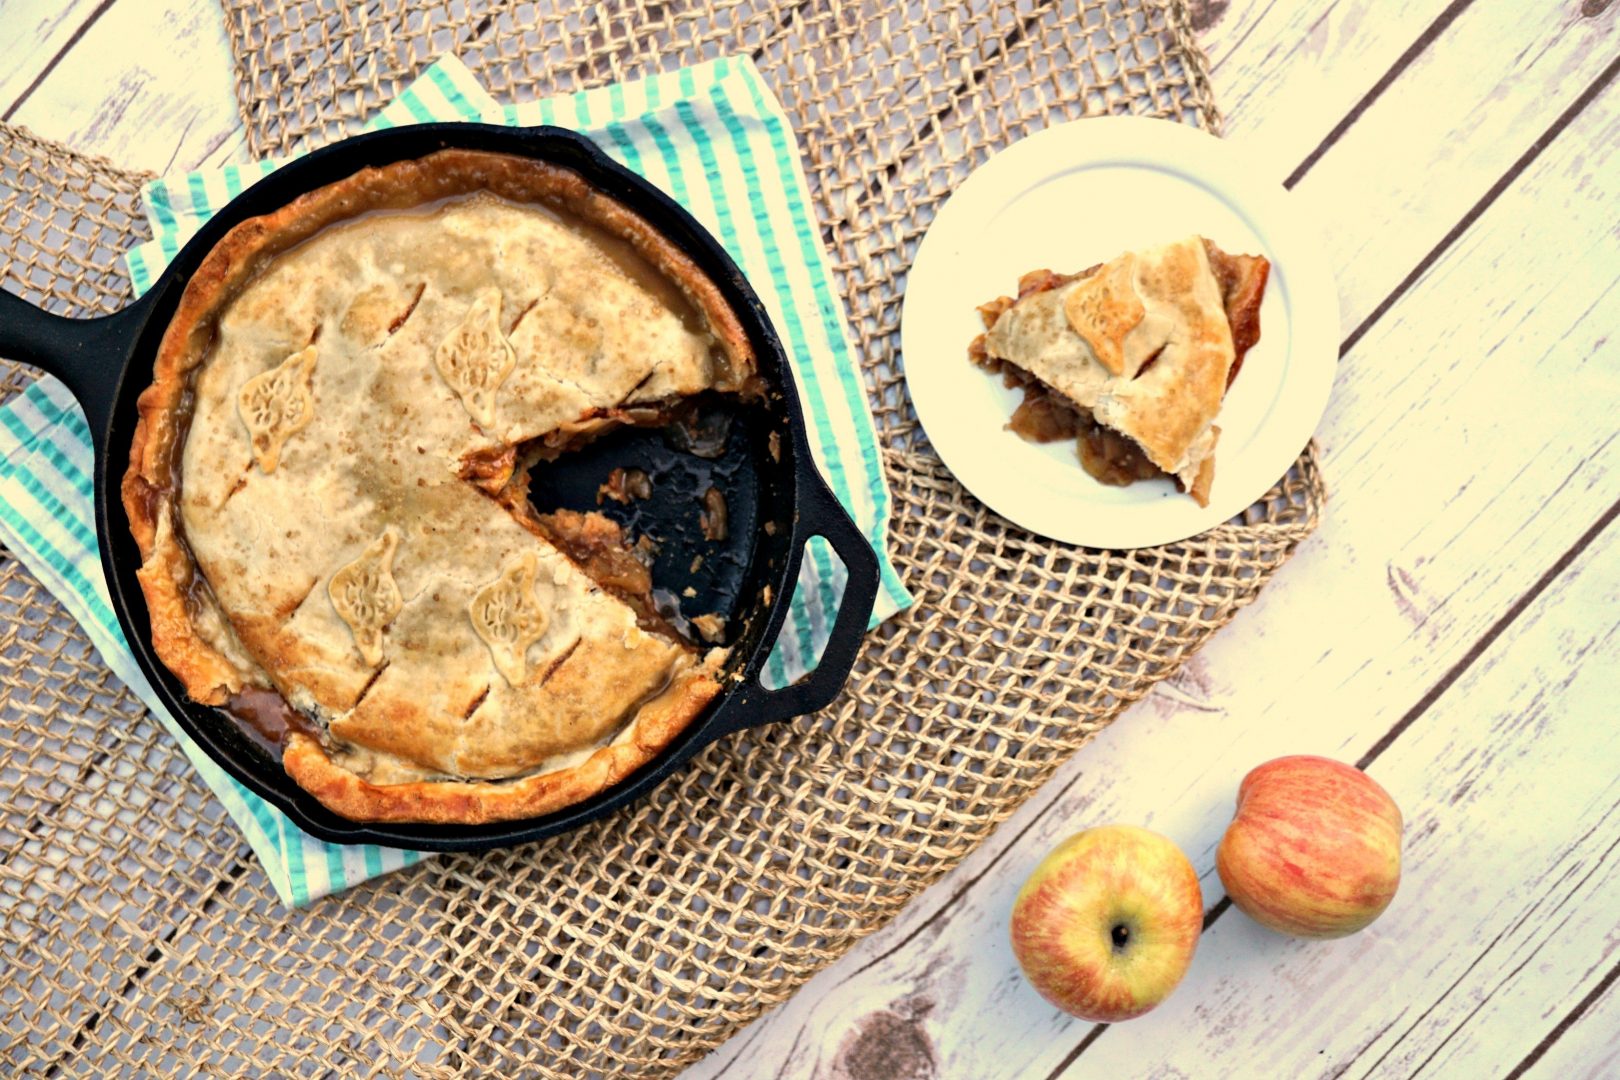 Smoked Bourbon and Salted Caramel Apple Pie